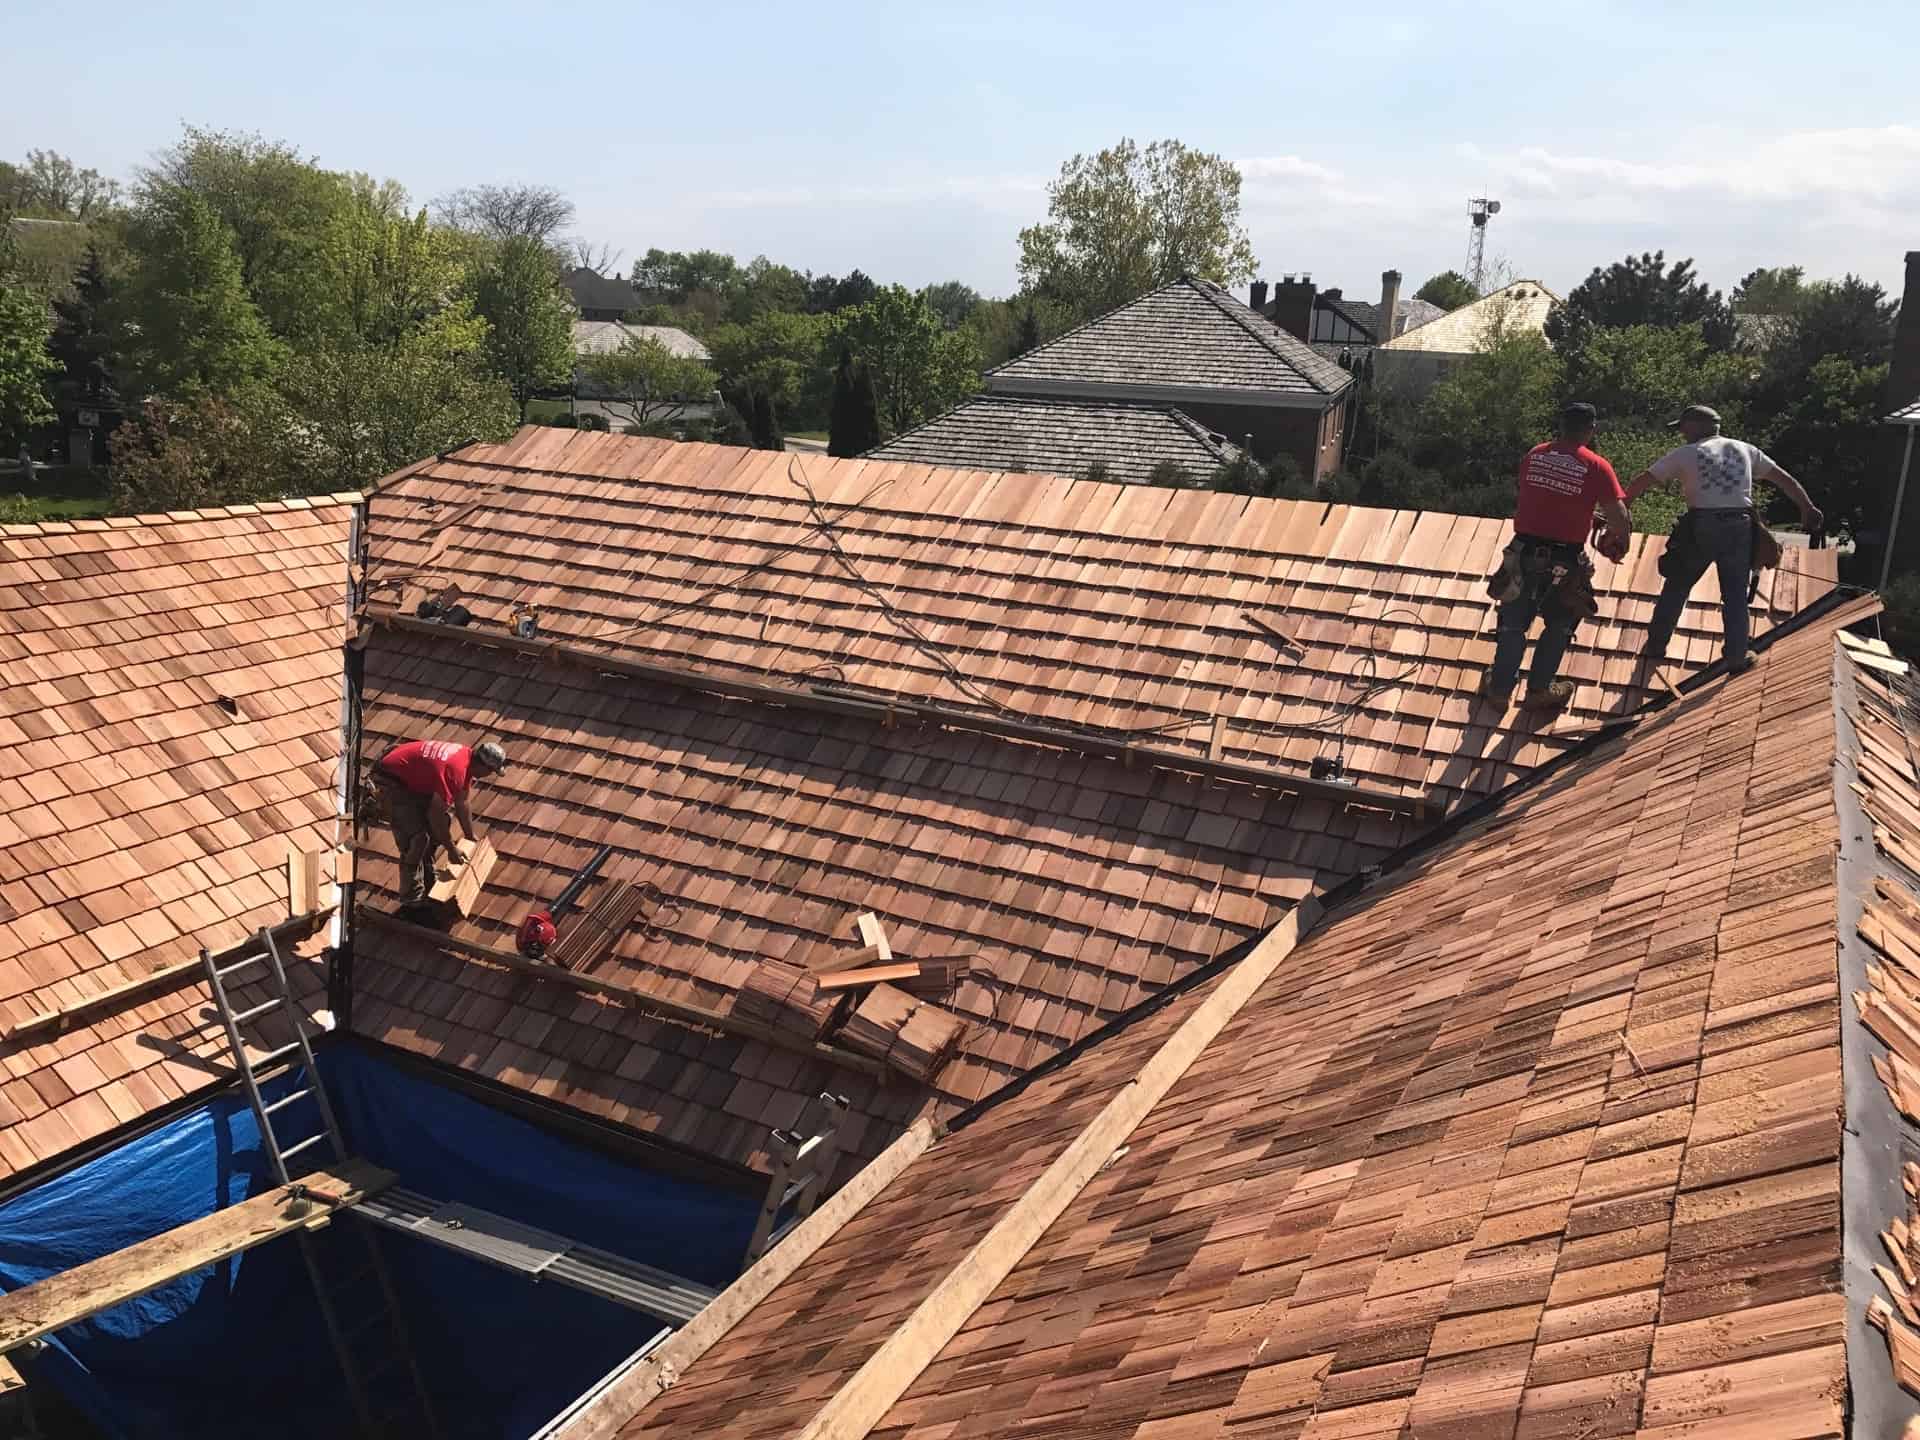 Roof replacement is a smart investment in your home